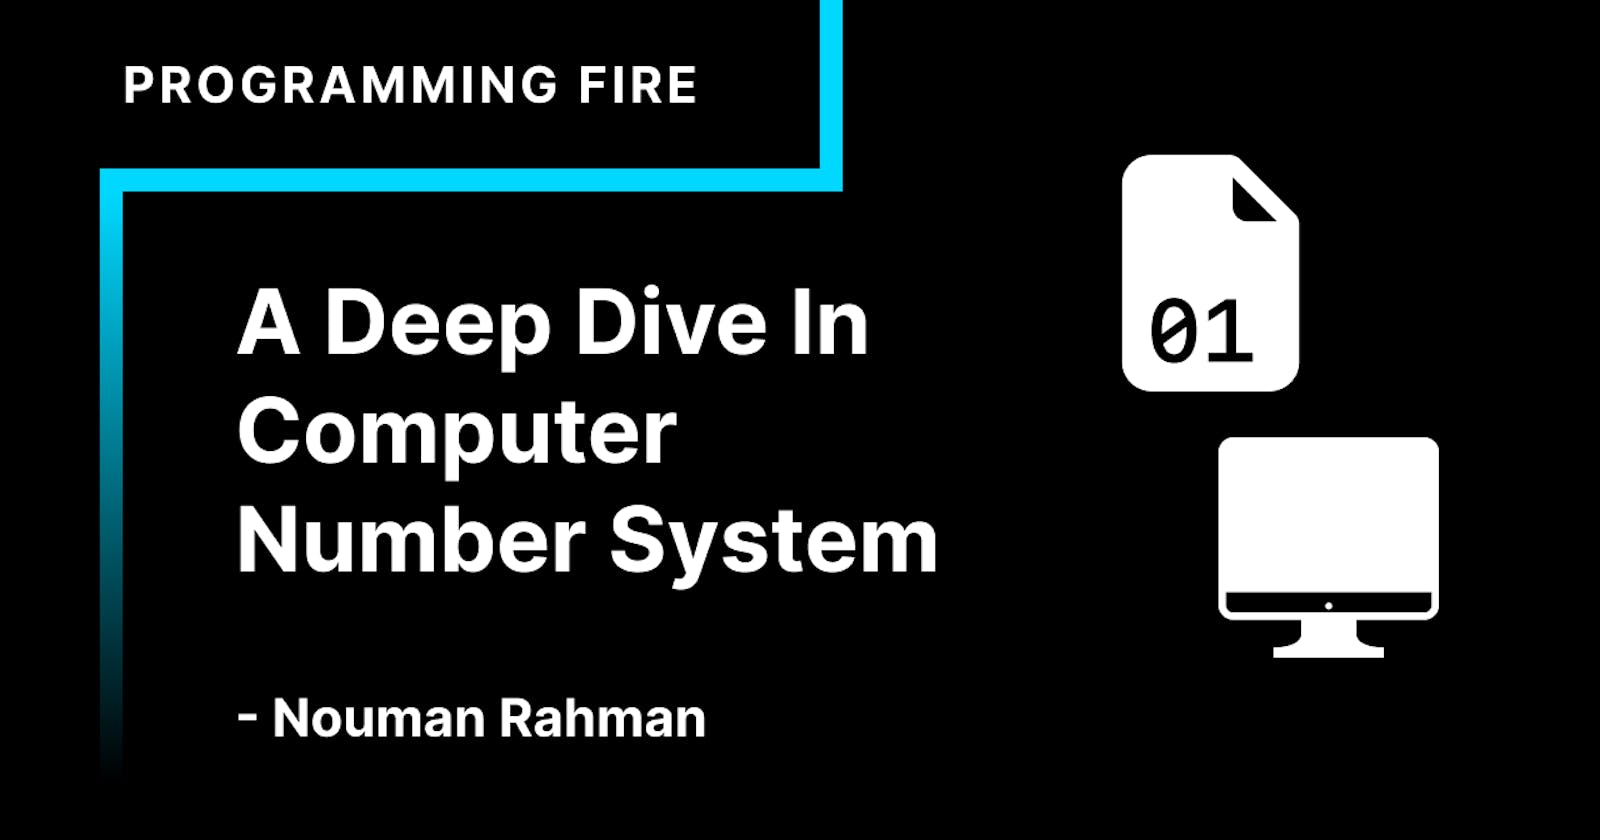 A Deep Dive in Computer Number Systems